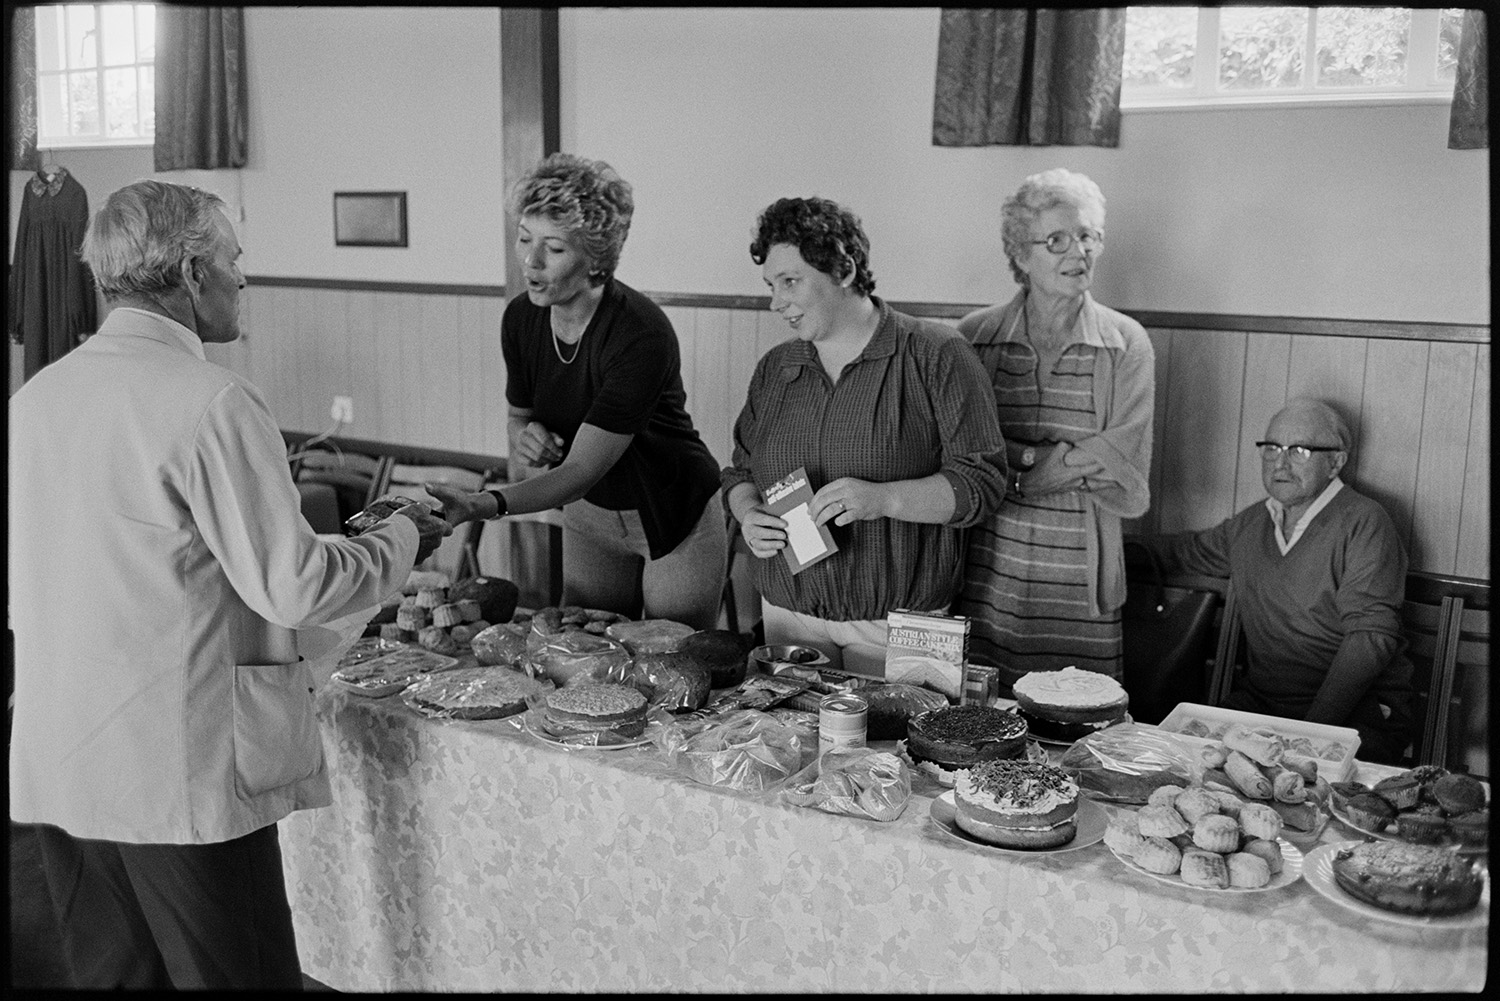 Schoolchildren giving concert in village hall, headmistress and children singing. 
[A man buying a cake from two women running a cake stall in an event at Dolton Village Hall.]